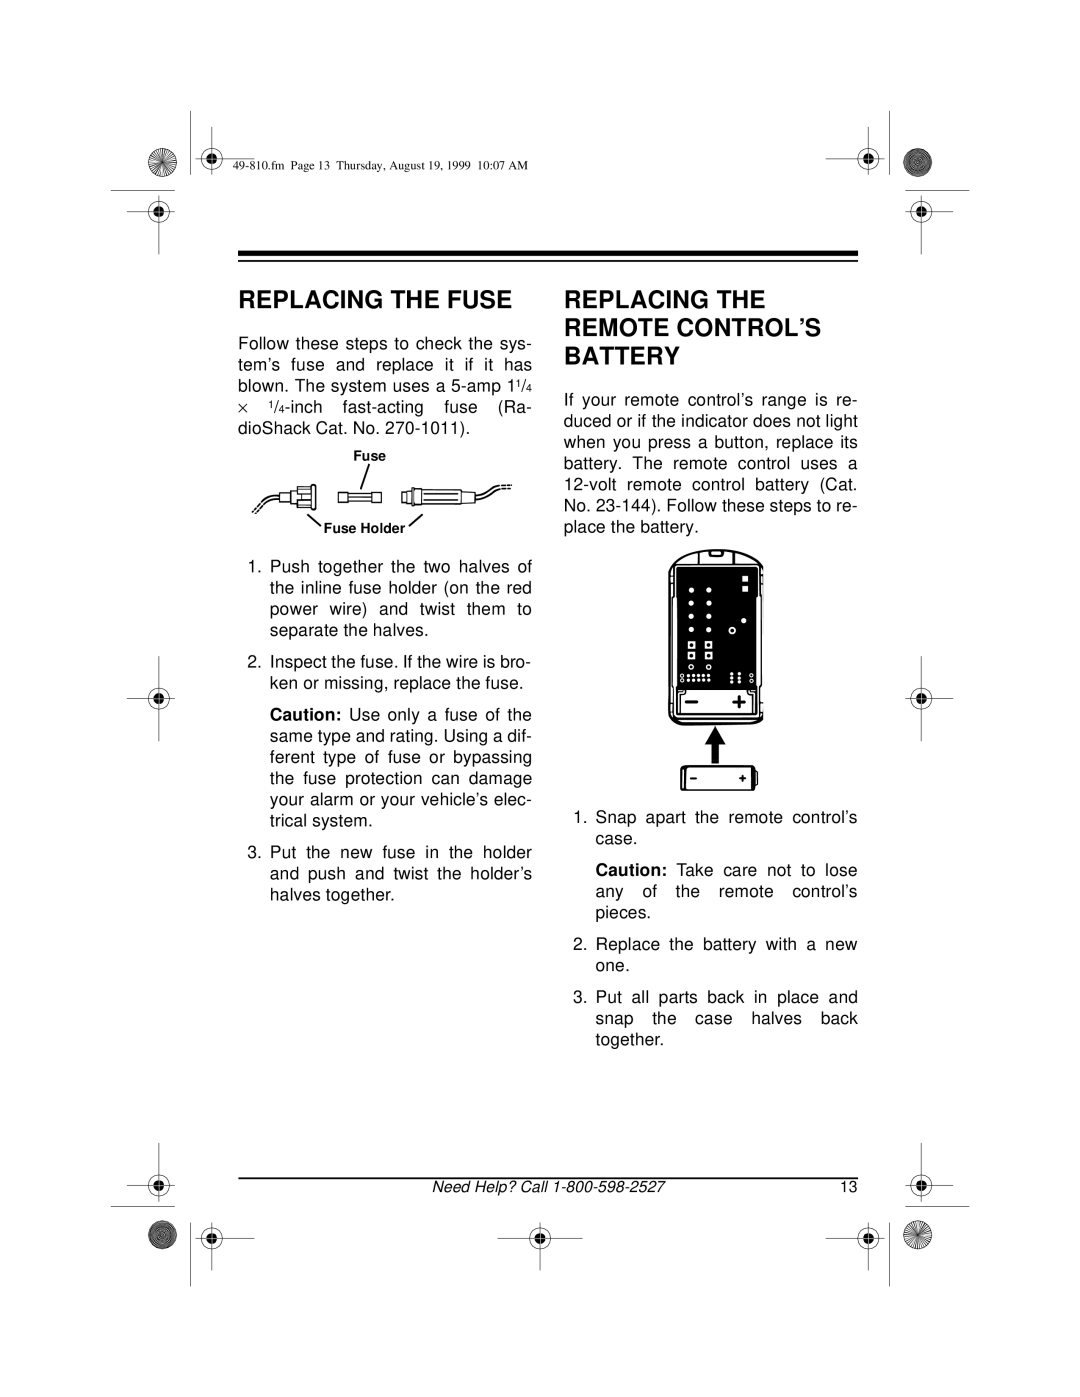 Radio Shack RS-1000 owner manual Replacing The Fuse, Replacing The Remote Control’S Battery 